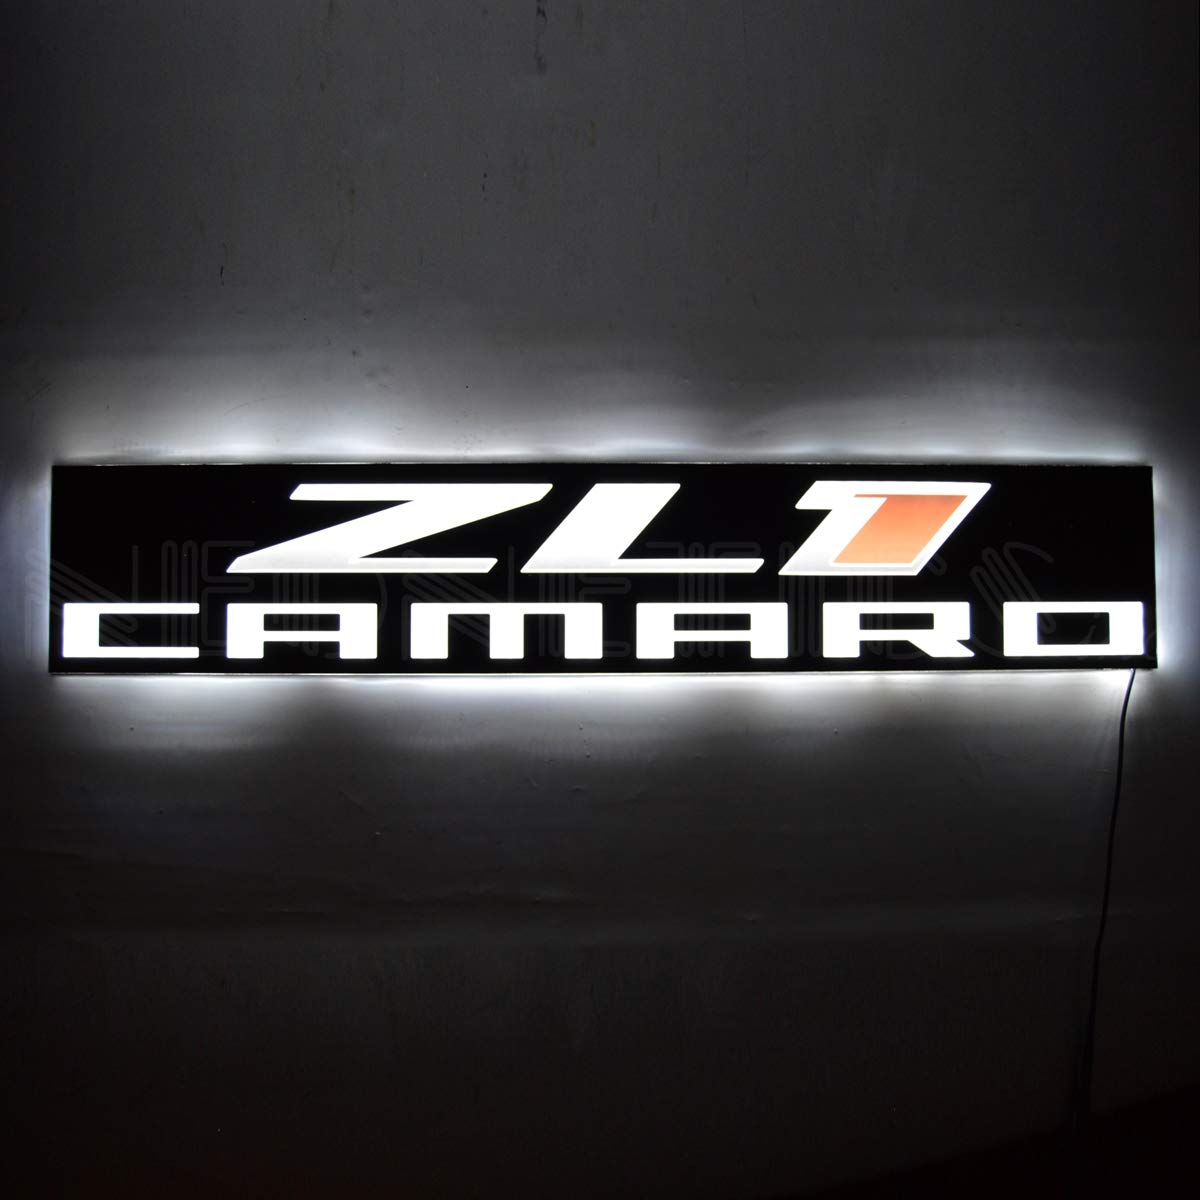 Chevy Camaro ZL1 Ultra Slim Led Wall Light Sign Red, Black and White Logo  with White LED Lights, Measures 36 inch by inch by 3/8 inch Thick  7LEDZL